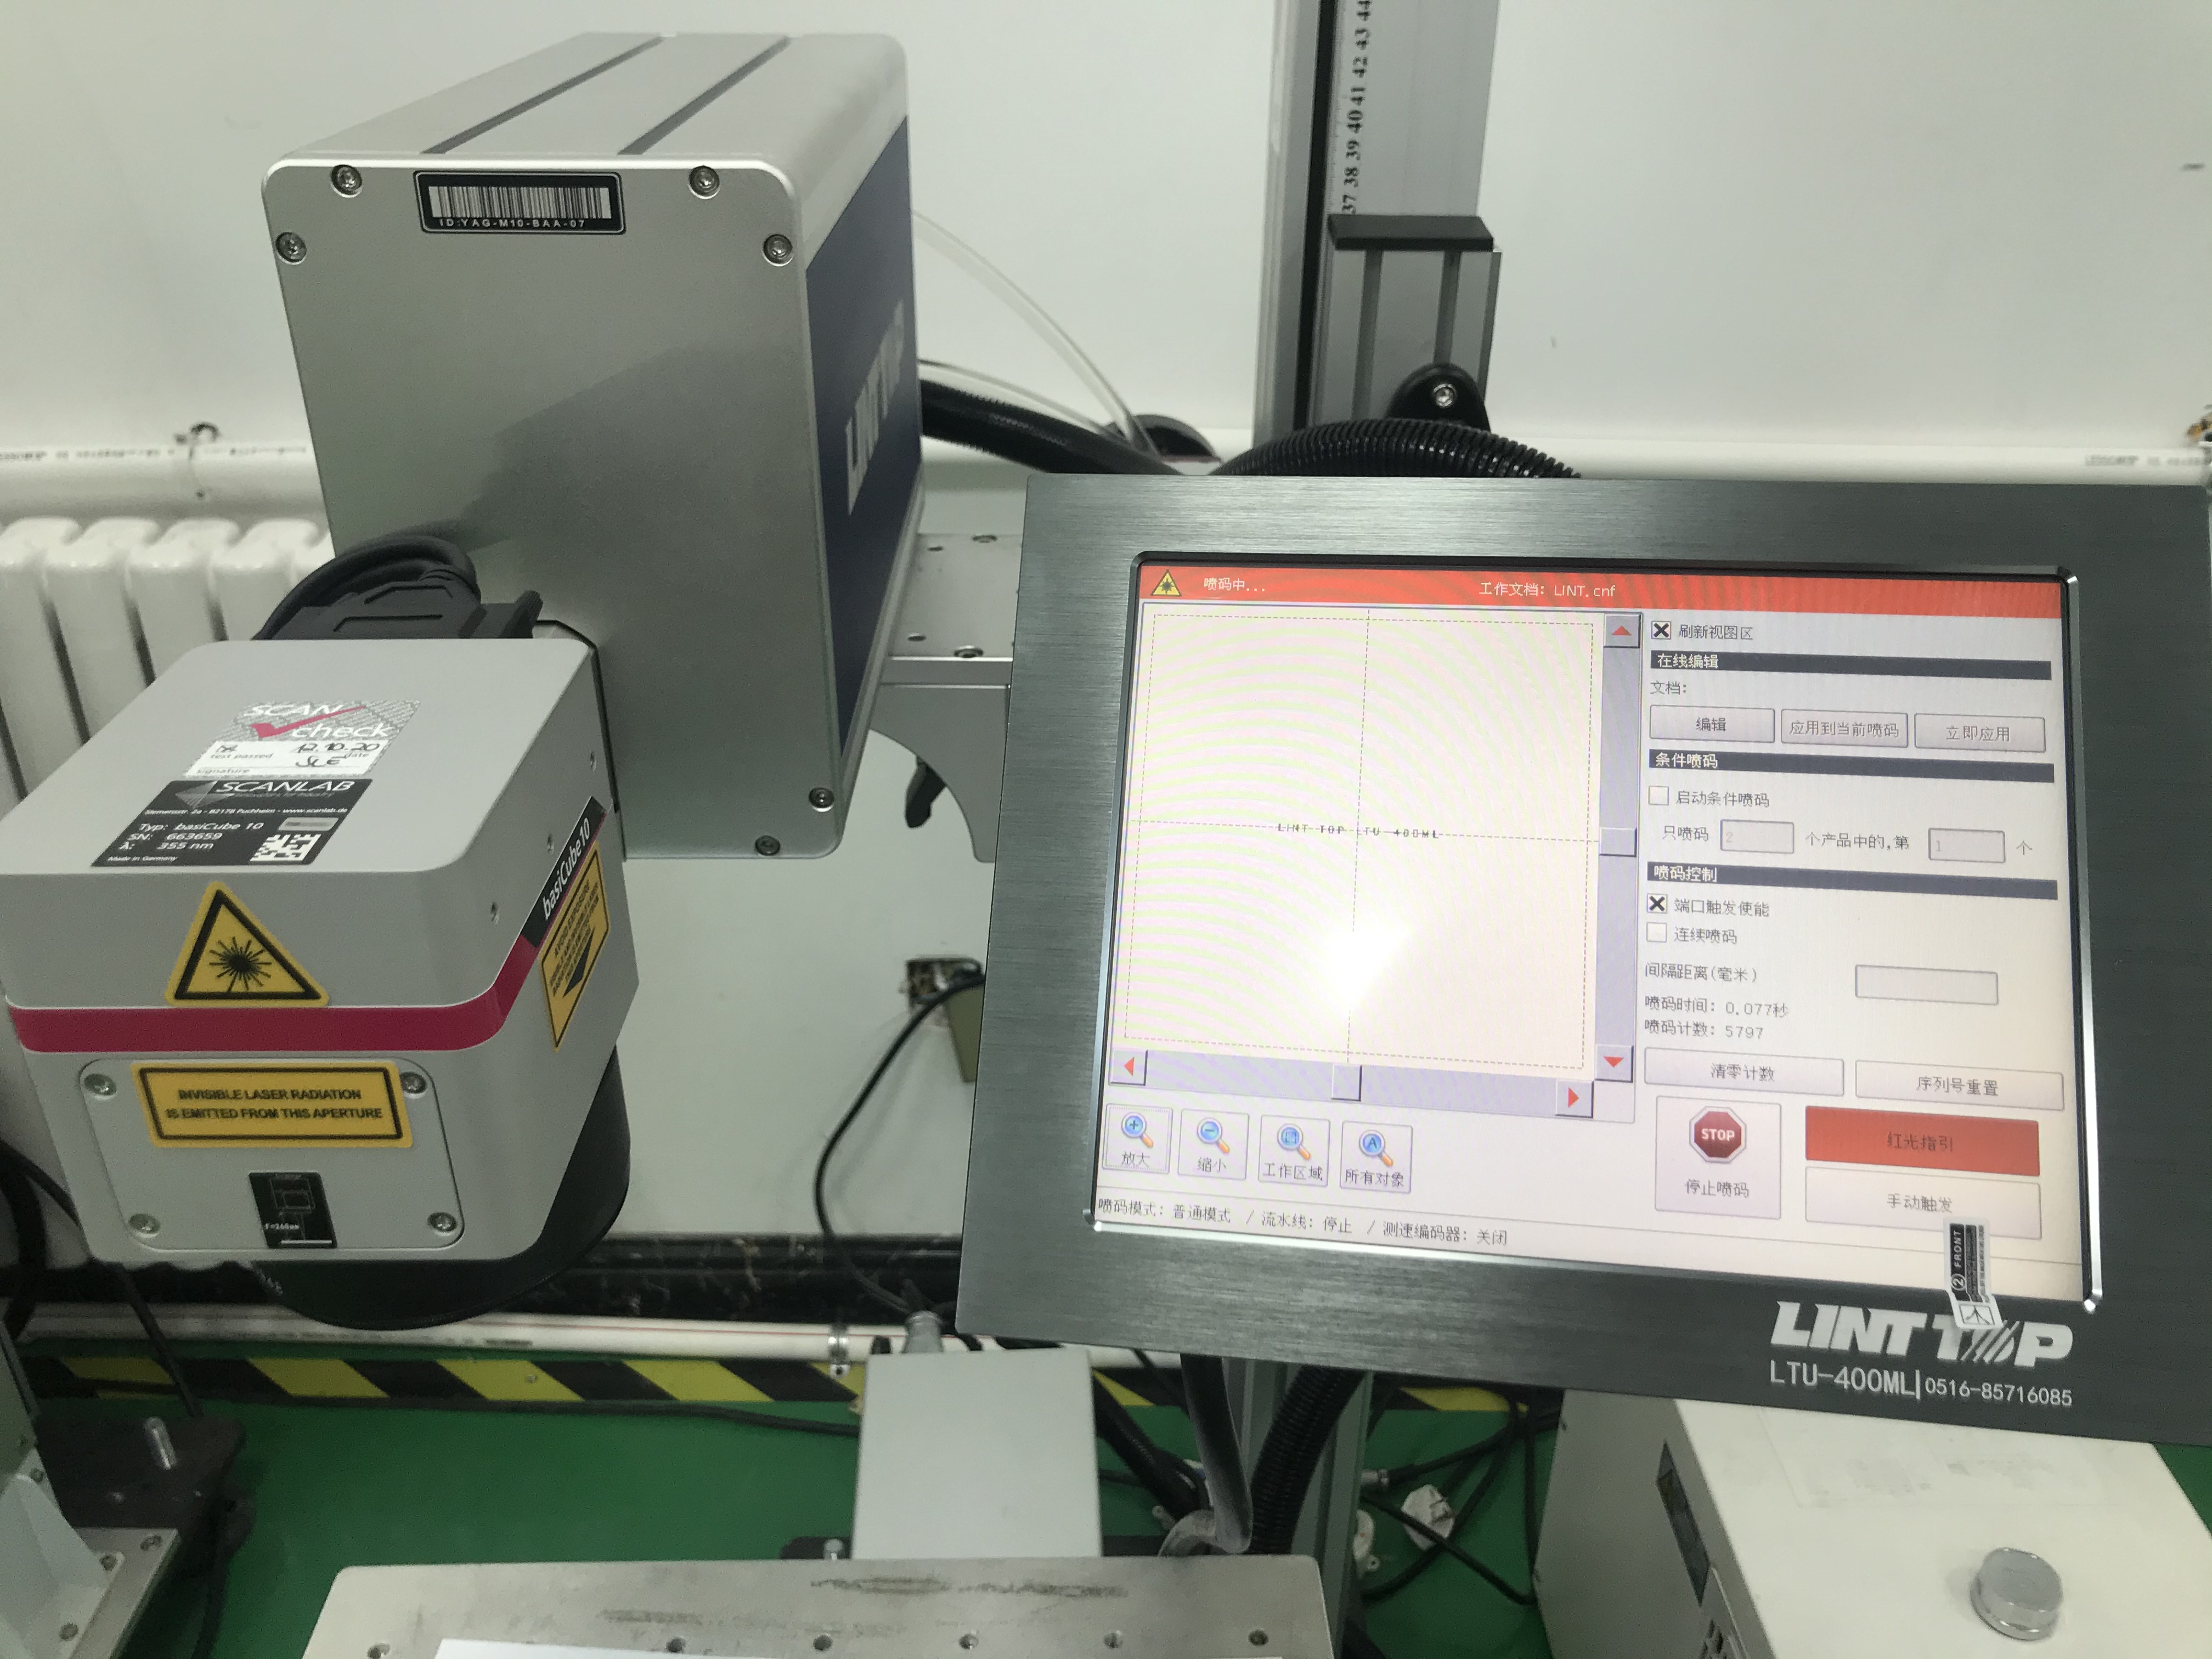 cable laser marking machine